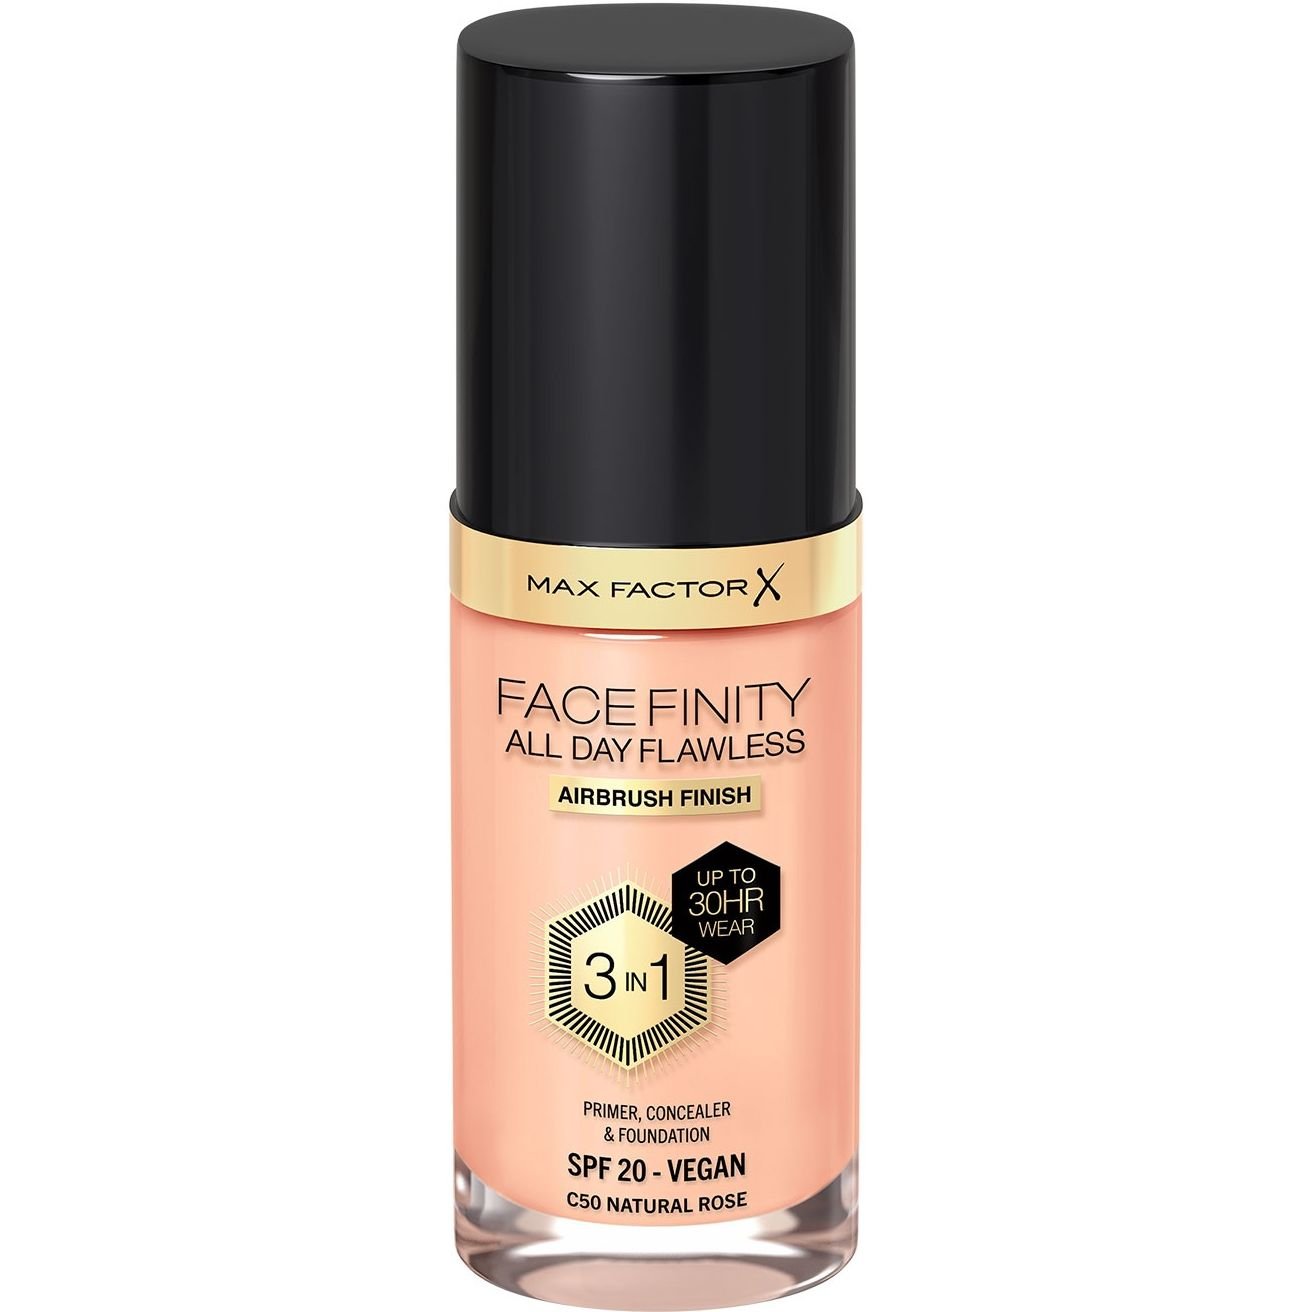 Тональная основа Max Factor Facefinity All Day Flawless 3 in 1 New тон C50 (Natural Rose) 30 мл - фото 1